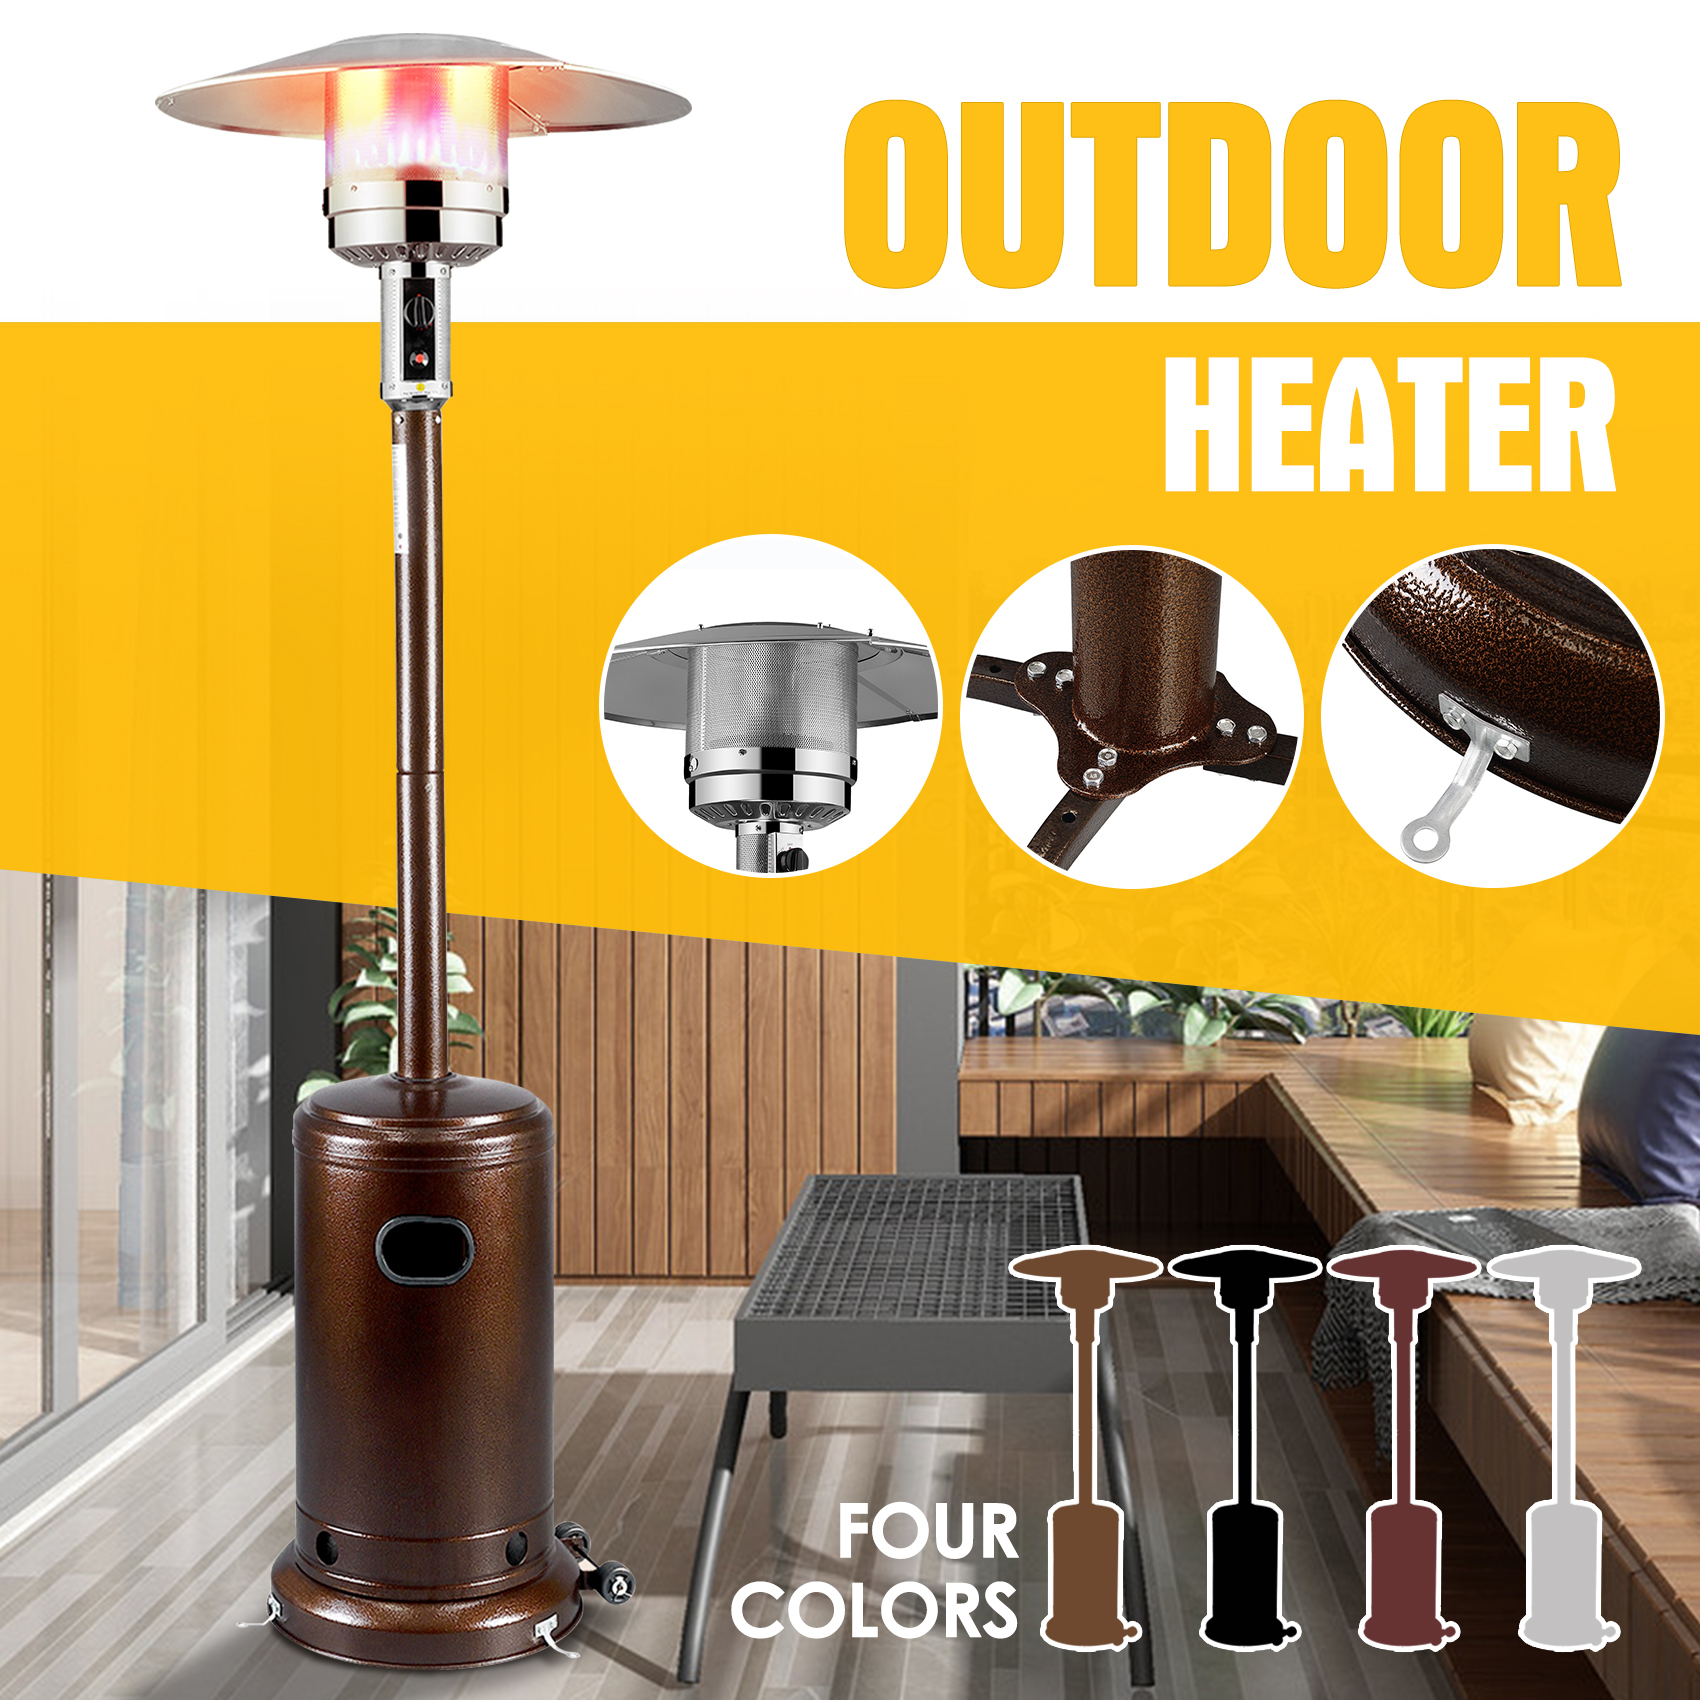 Details About Commercial Lp Gas Garden Outdoor Patio Heater Propane Stainless Steel 4 Color throughout size 1700 X 1700